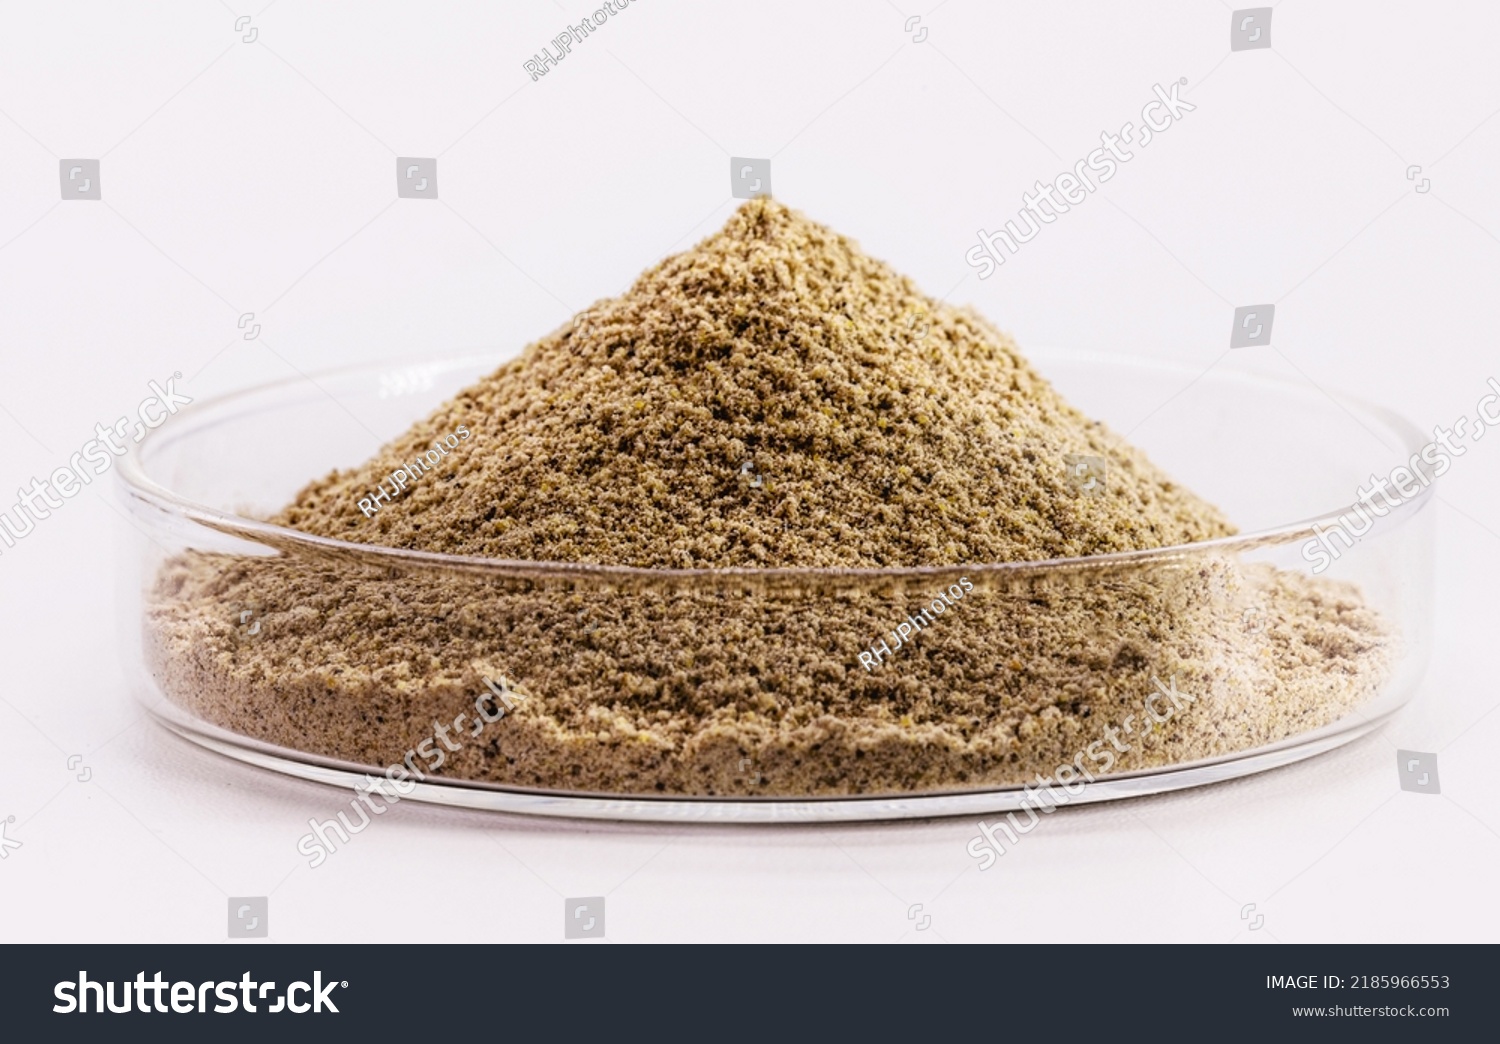 Yeast Extract Powder, a waste product from brewing that contains high concentrations of yeast and is often used in the food industry as an additive #2185966553